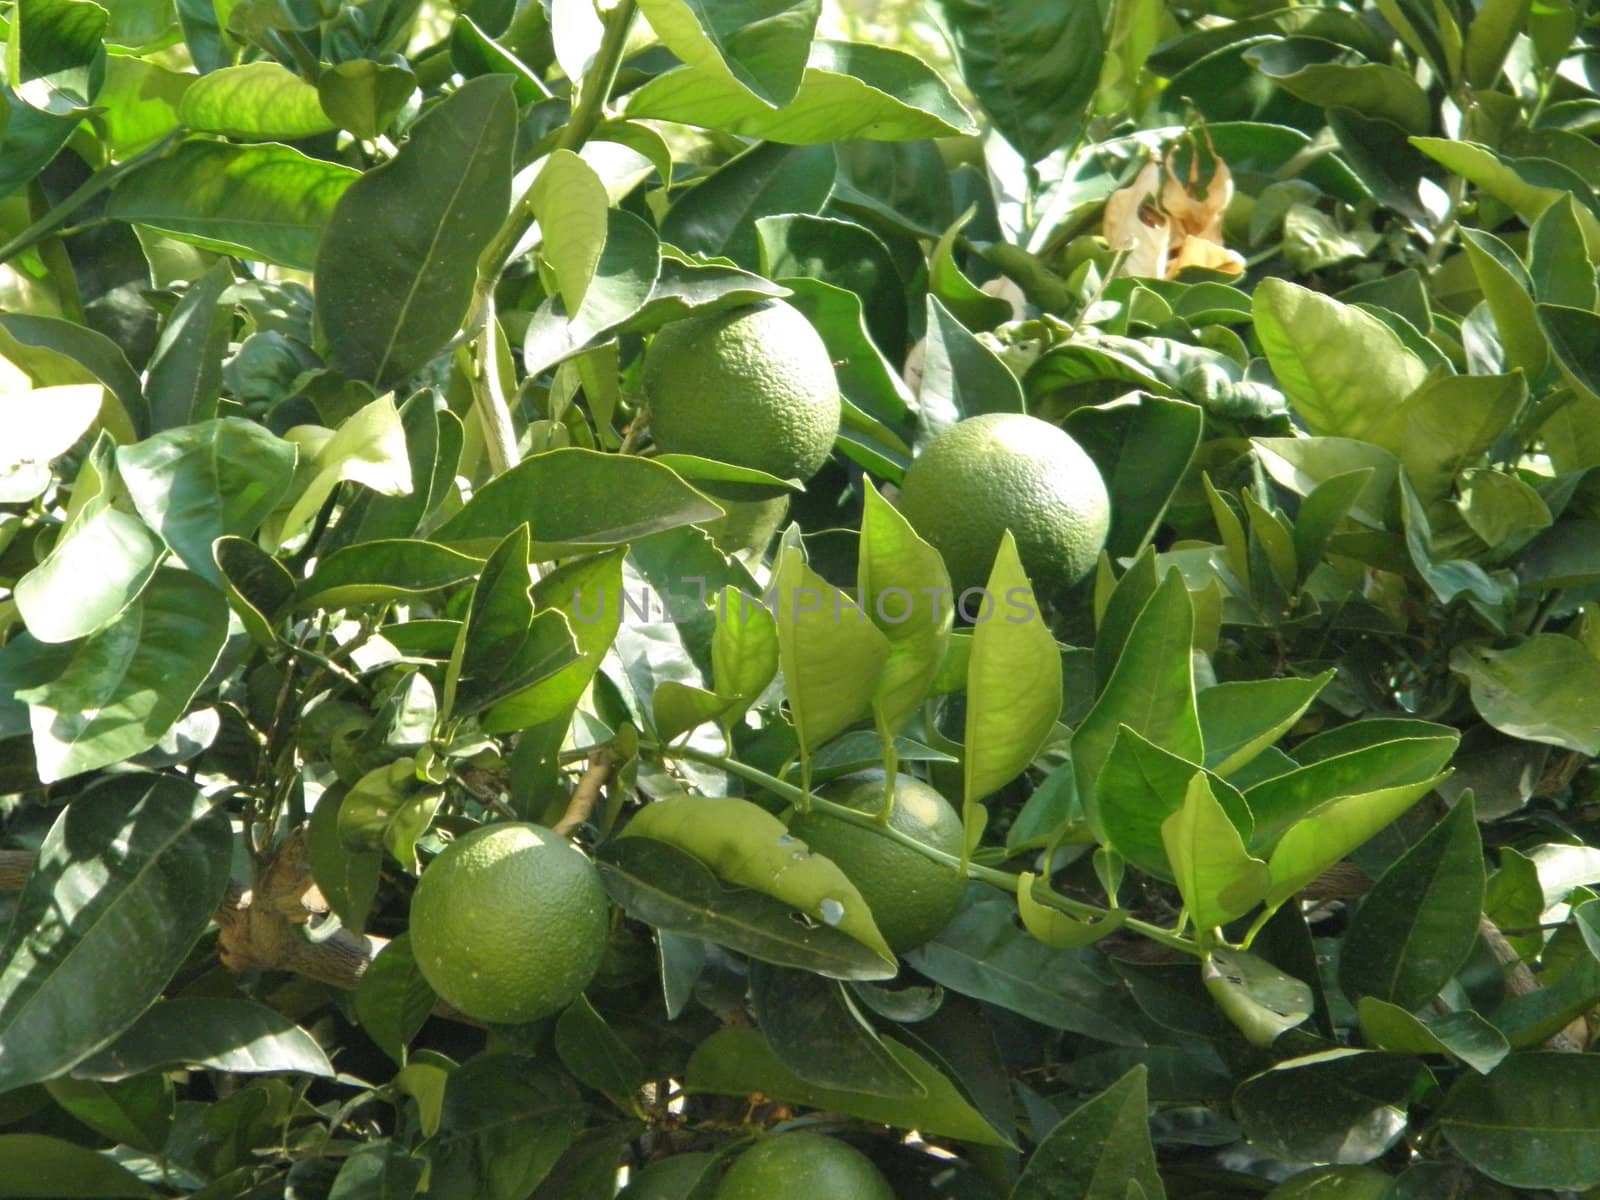 Photo of an orange tree with green leaves and unripe green fruit.